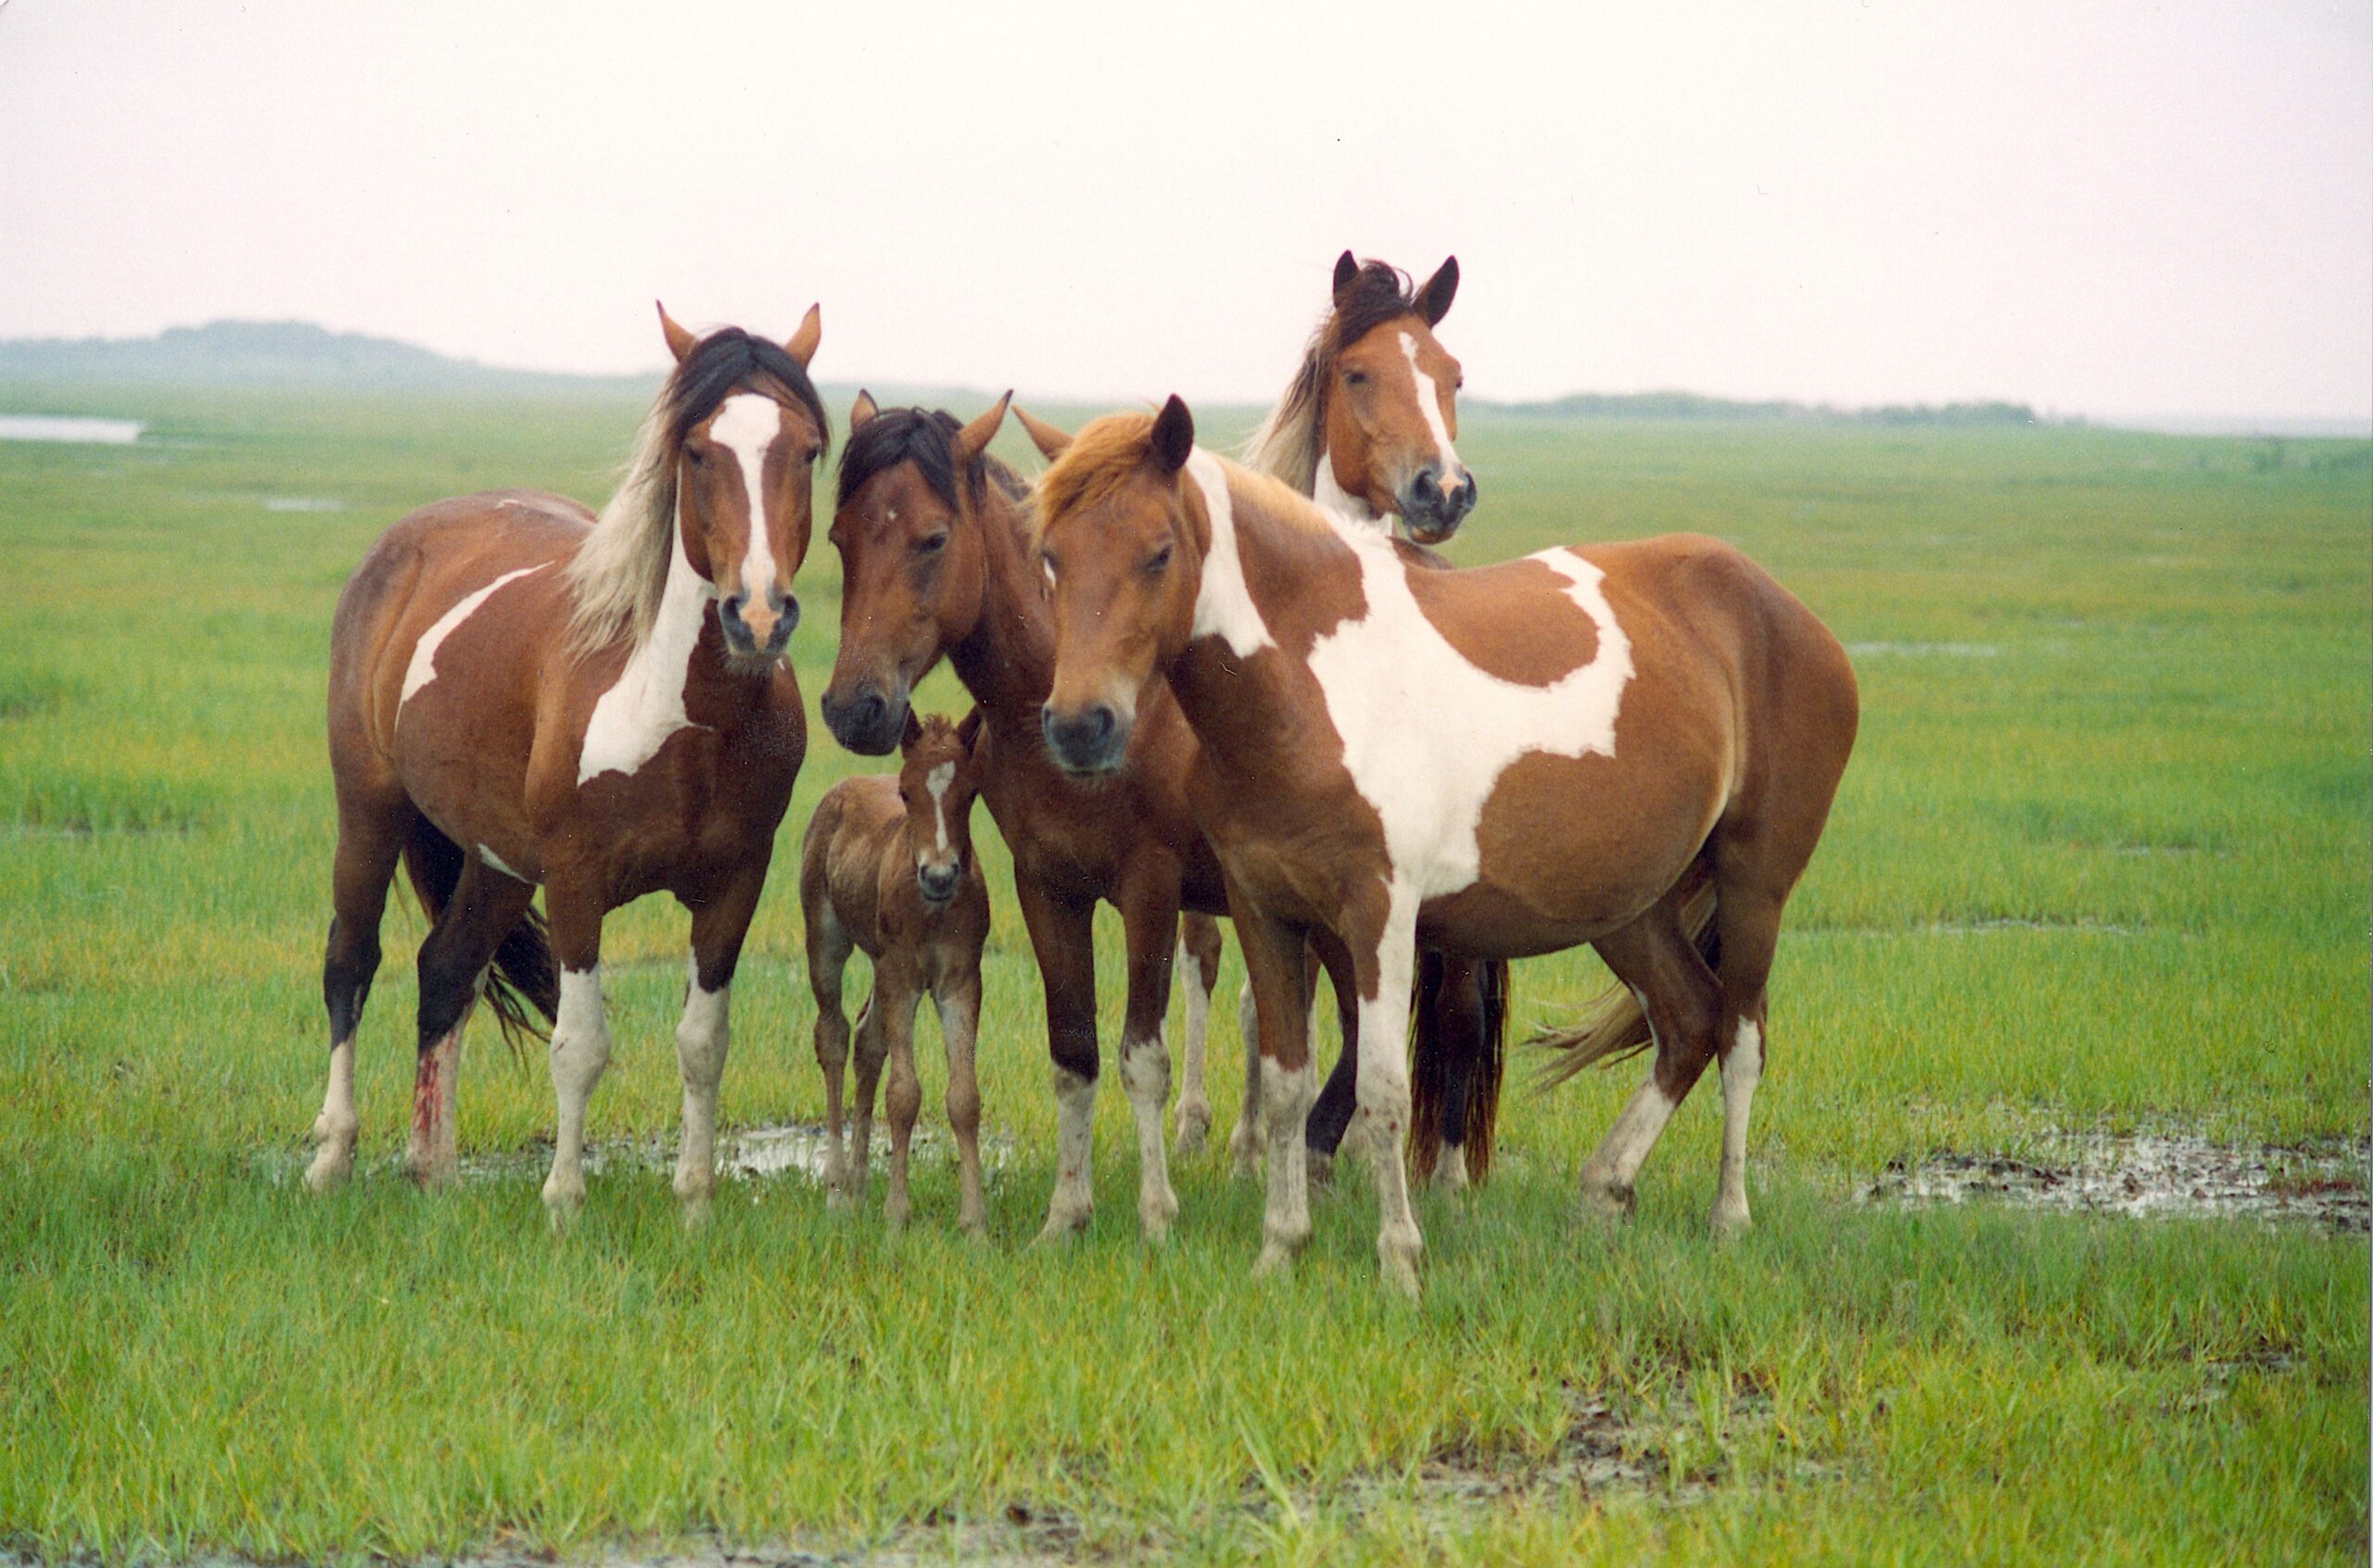 image: 5 horses stand in a saltmarsh.